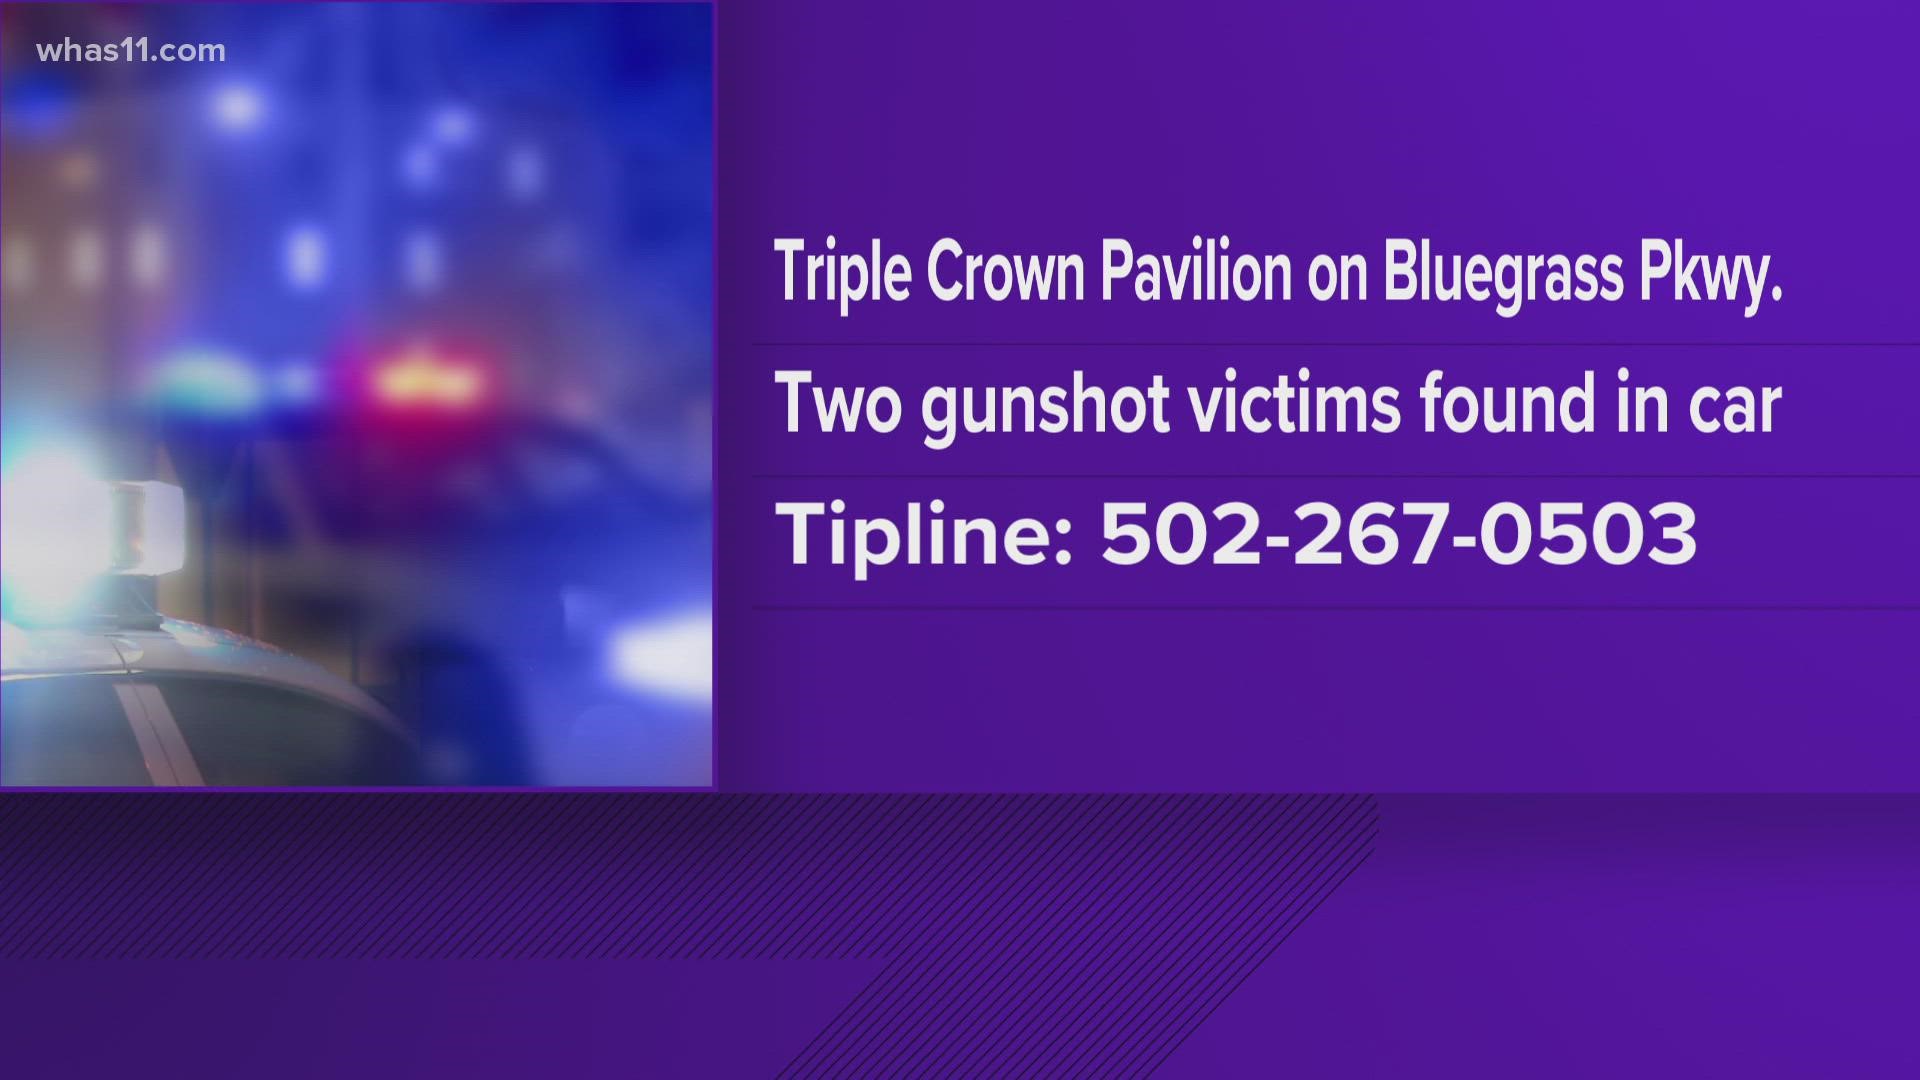 Police said the victims were shot at the Triple Crown Pavillion on Bluegrass Parkway early Sunday.